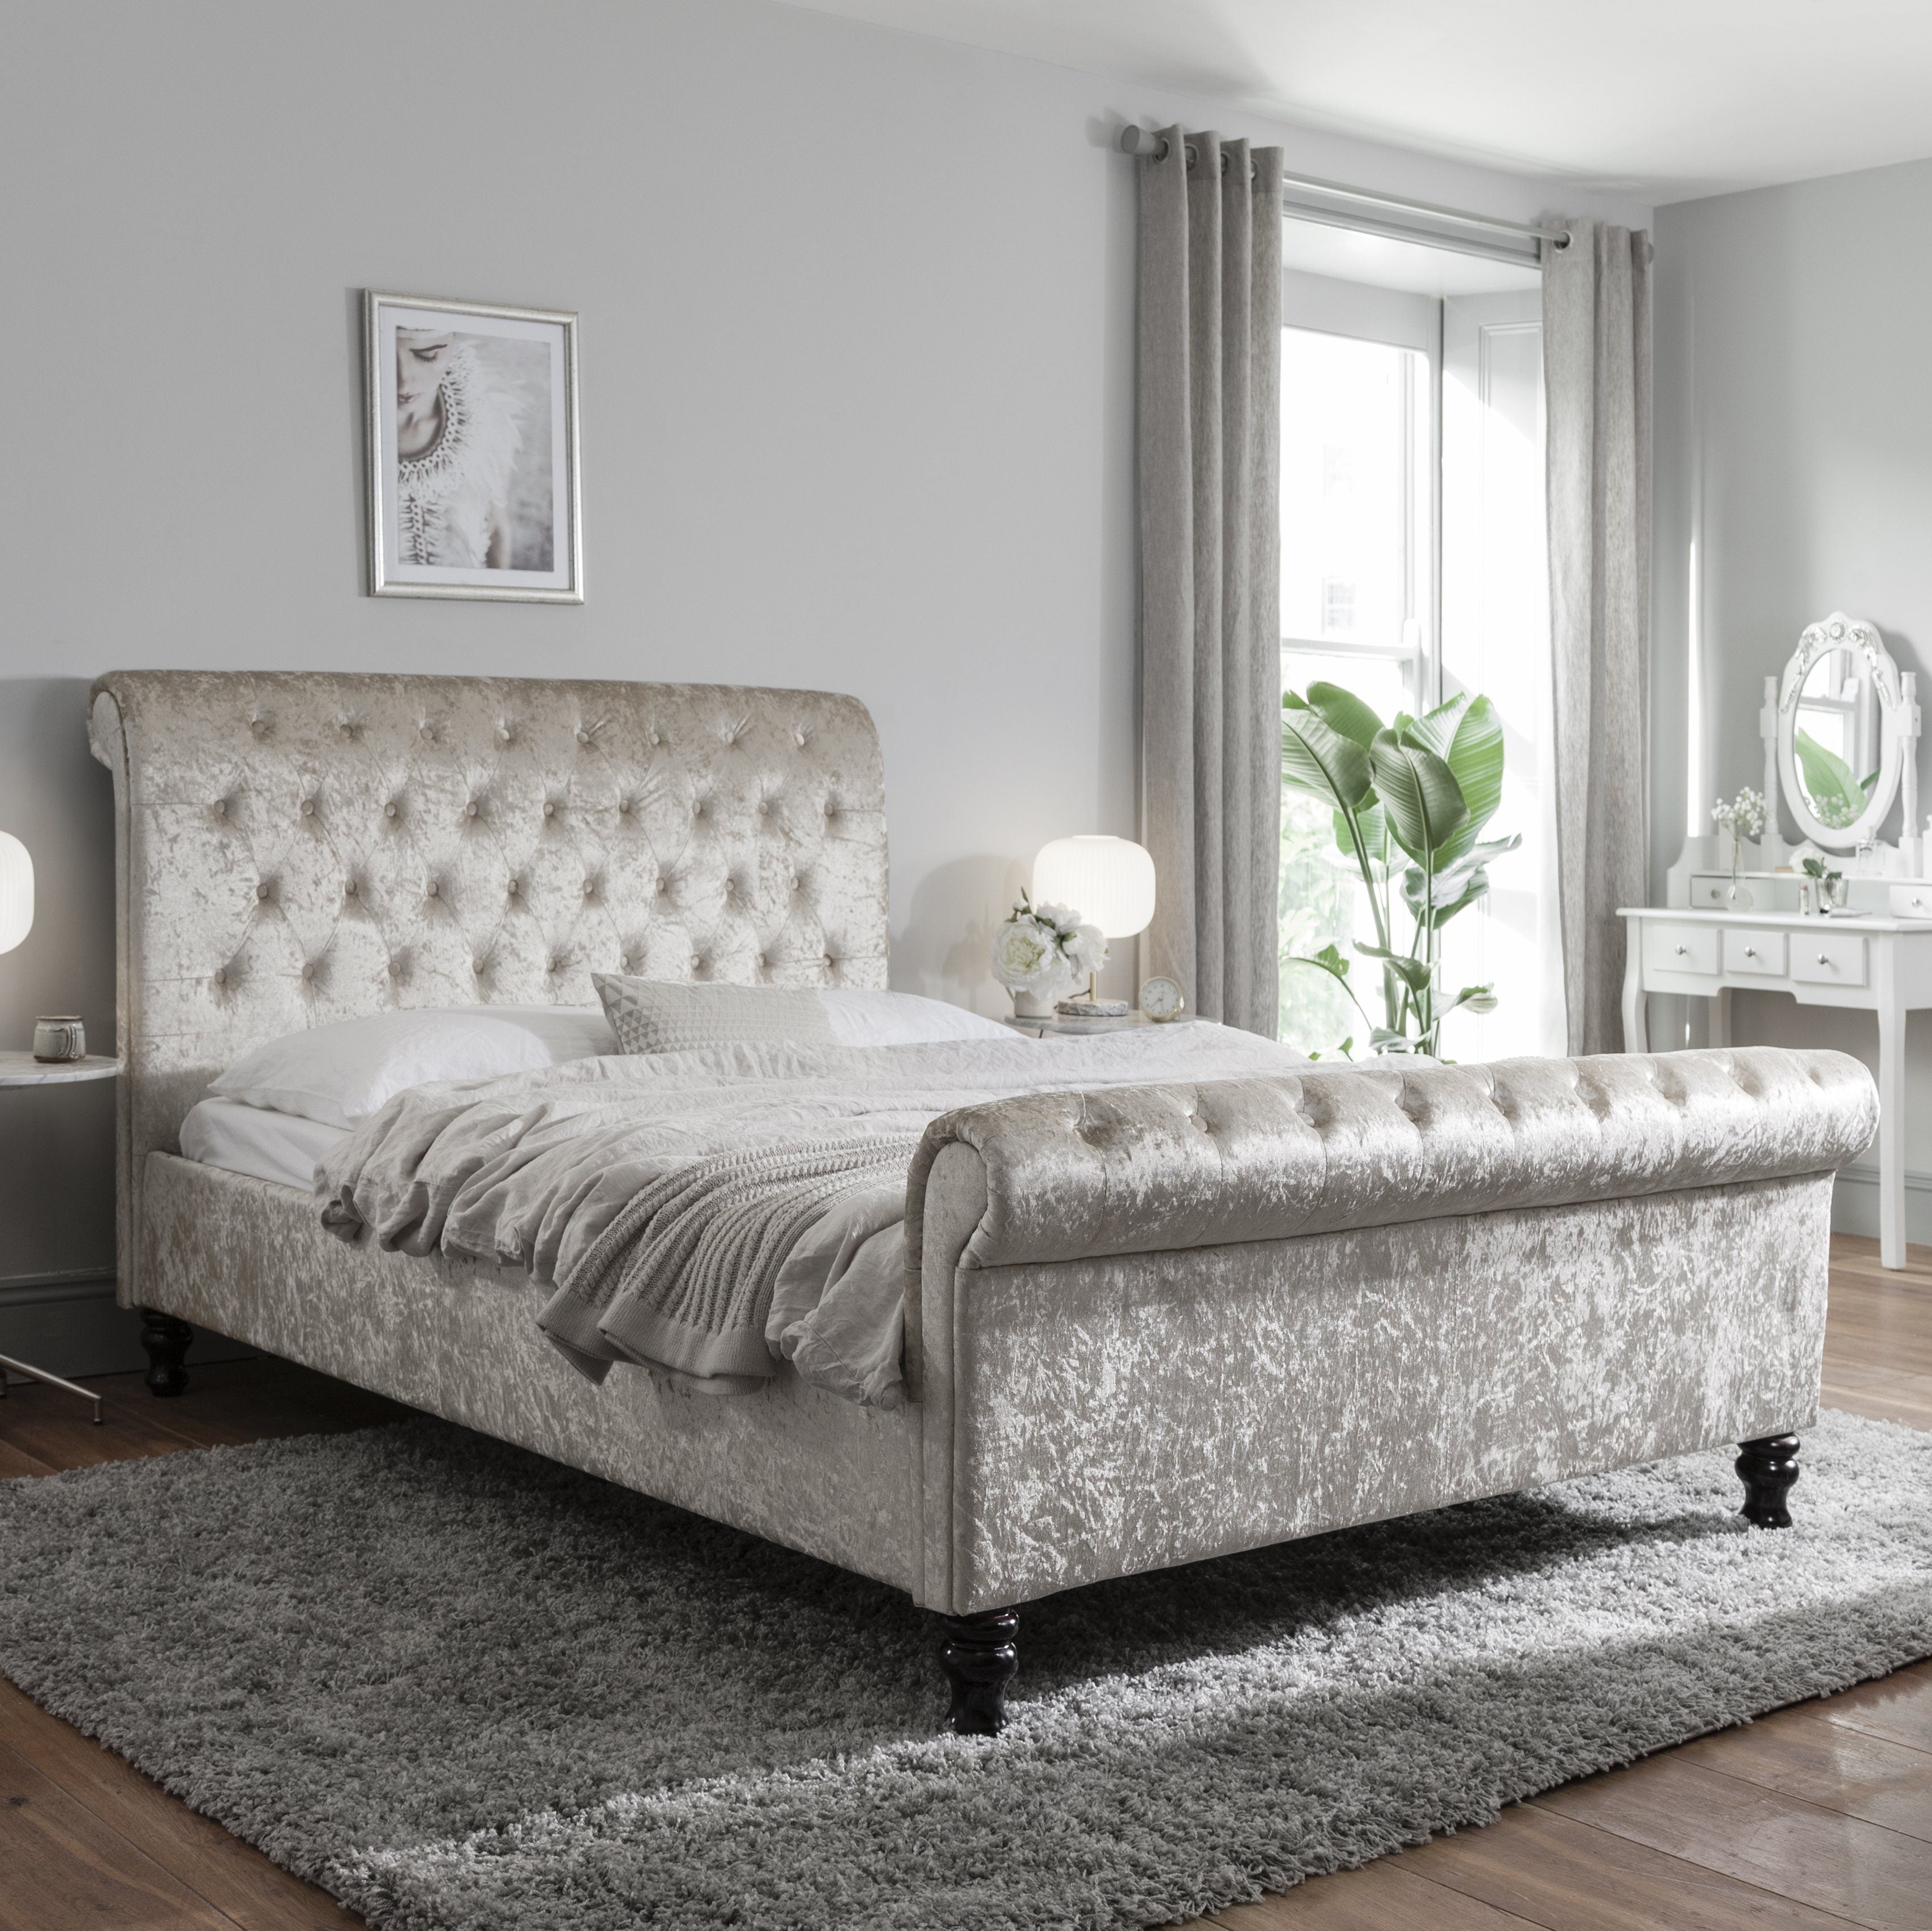 Cremio Chesterfield Sleigh Scroll Bed Frame